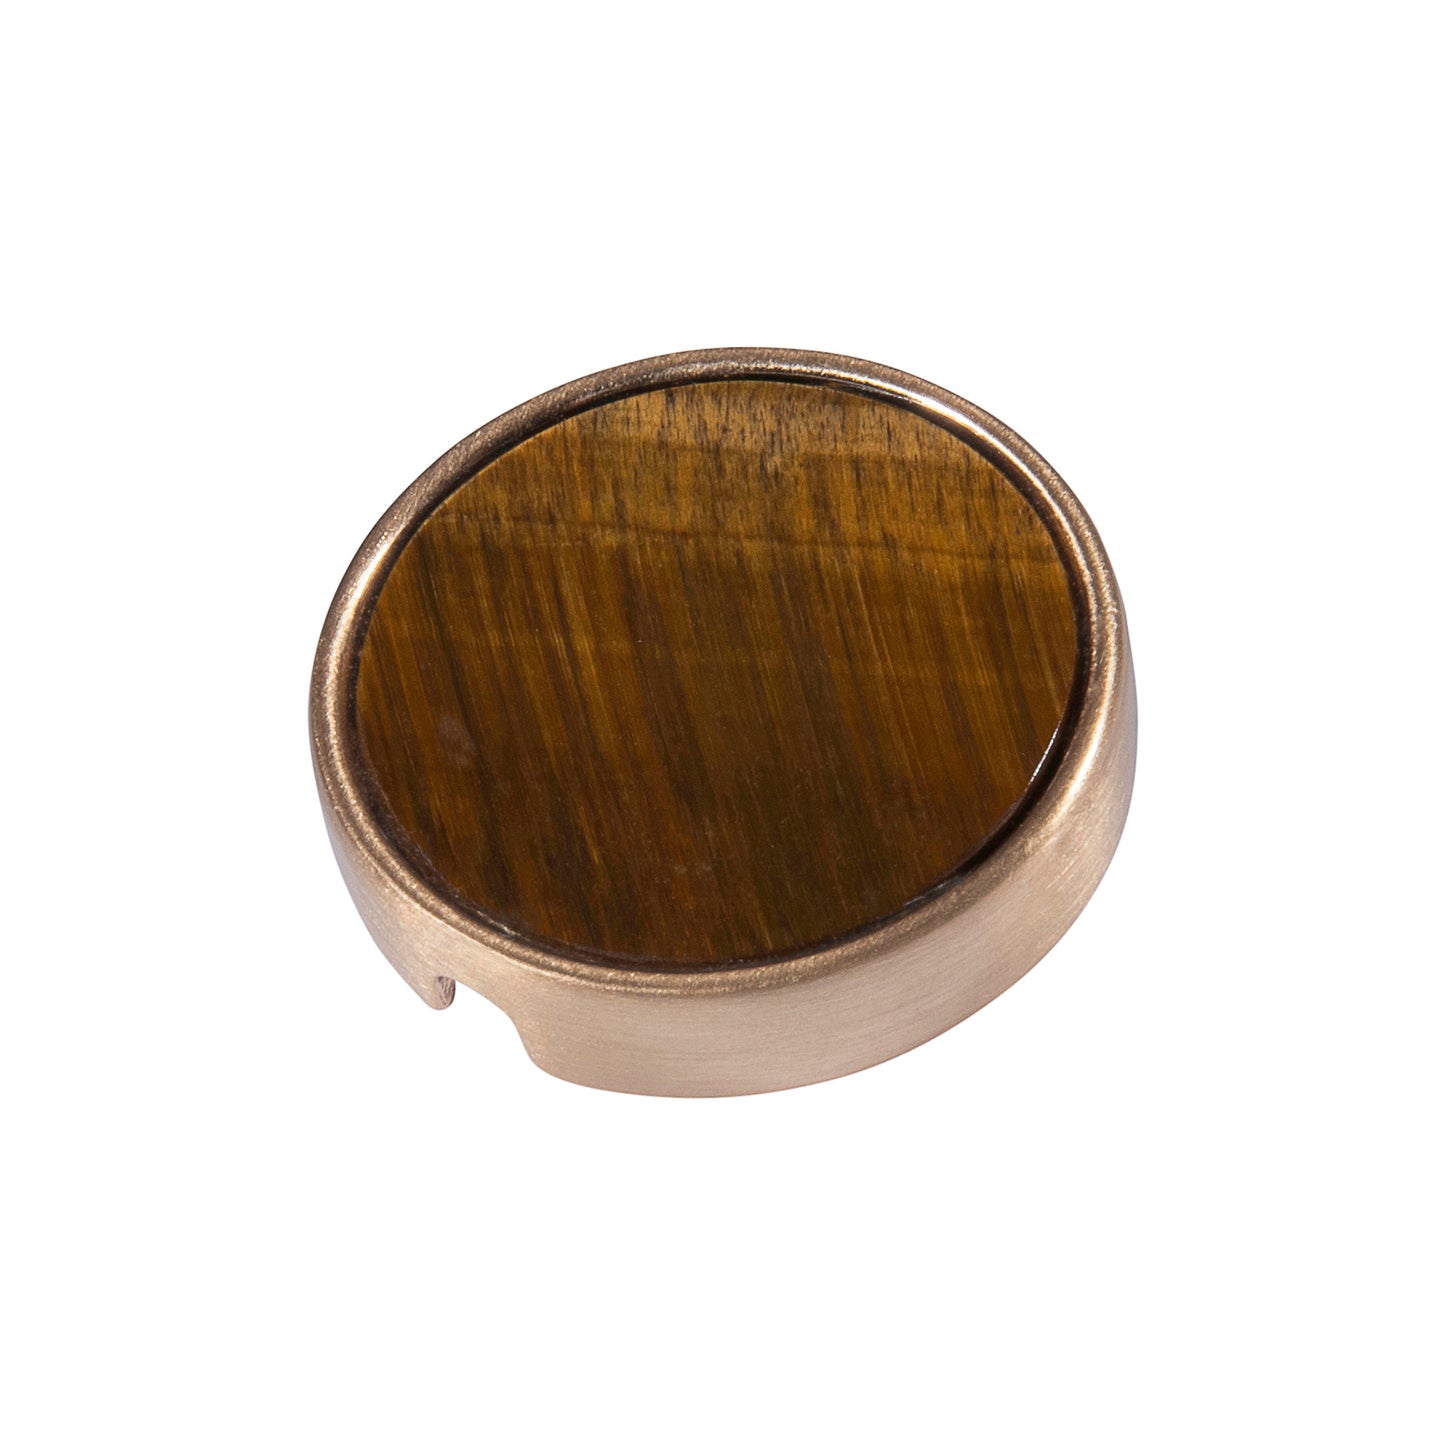 21mm button in carbon metal and tiger's eye